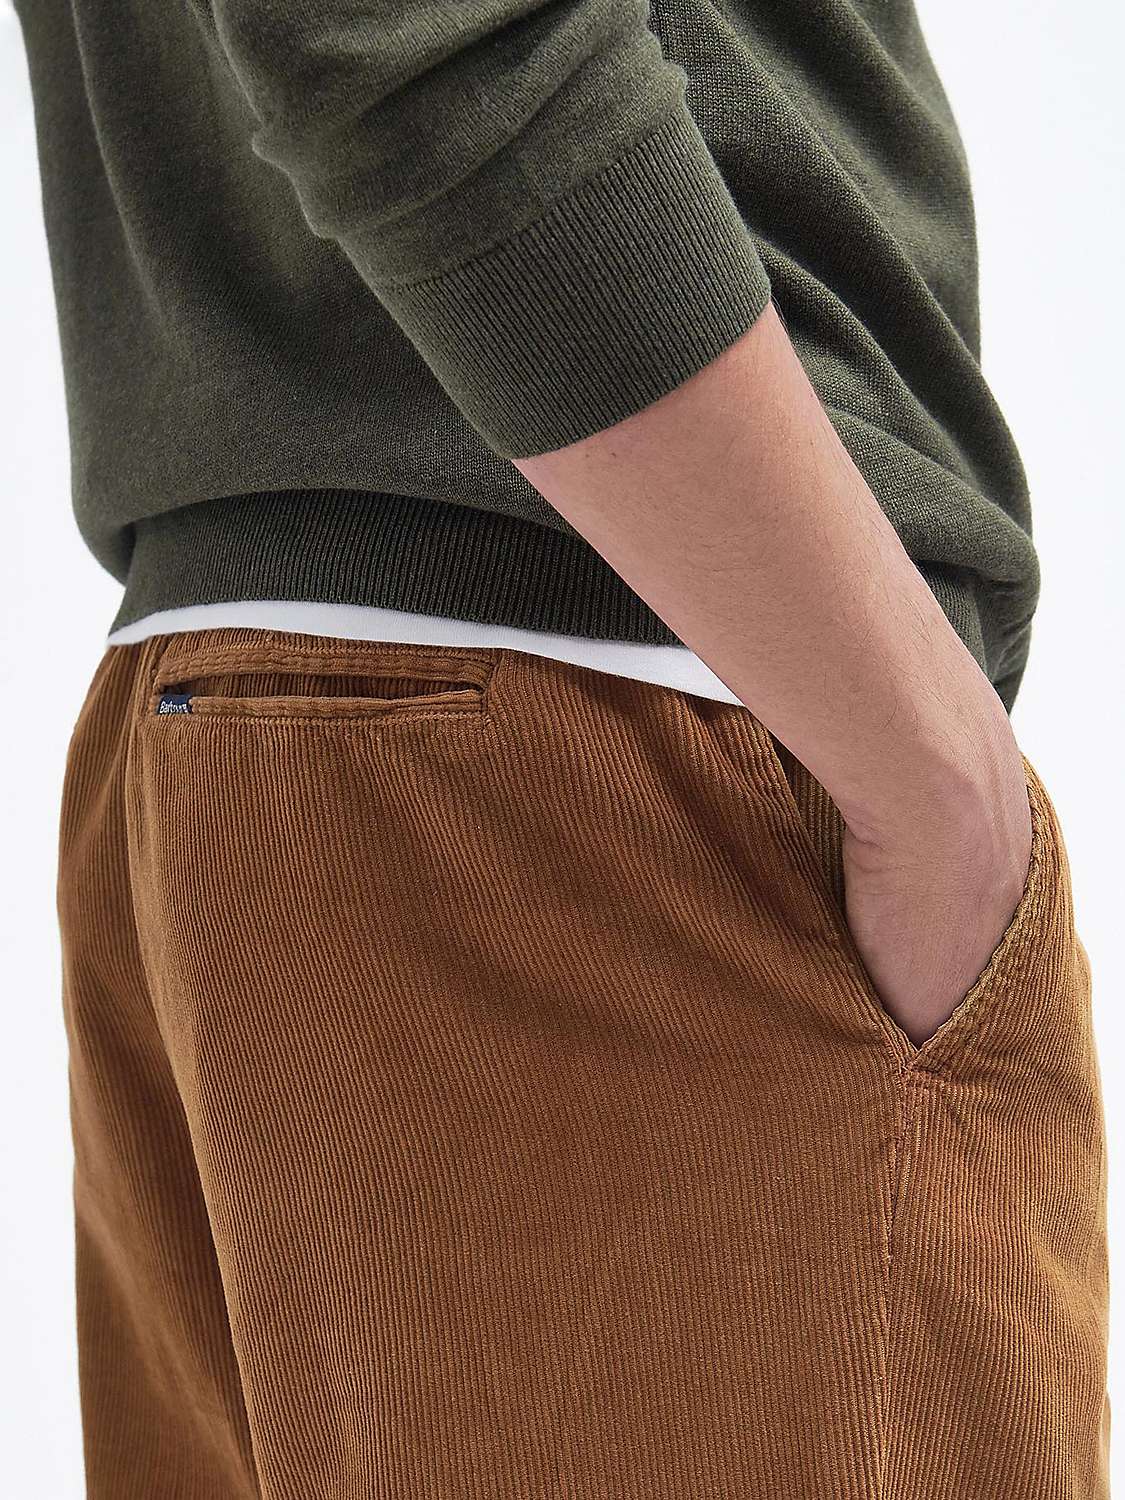 Buy Barbour Spedwell  Cotton Corduroy Trousers, Cinnamon Online at johnlewis.com